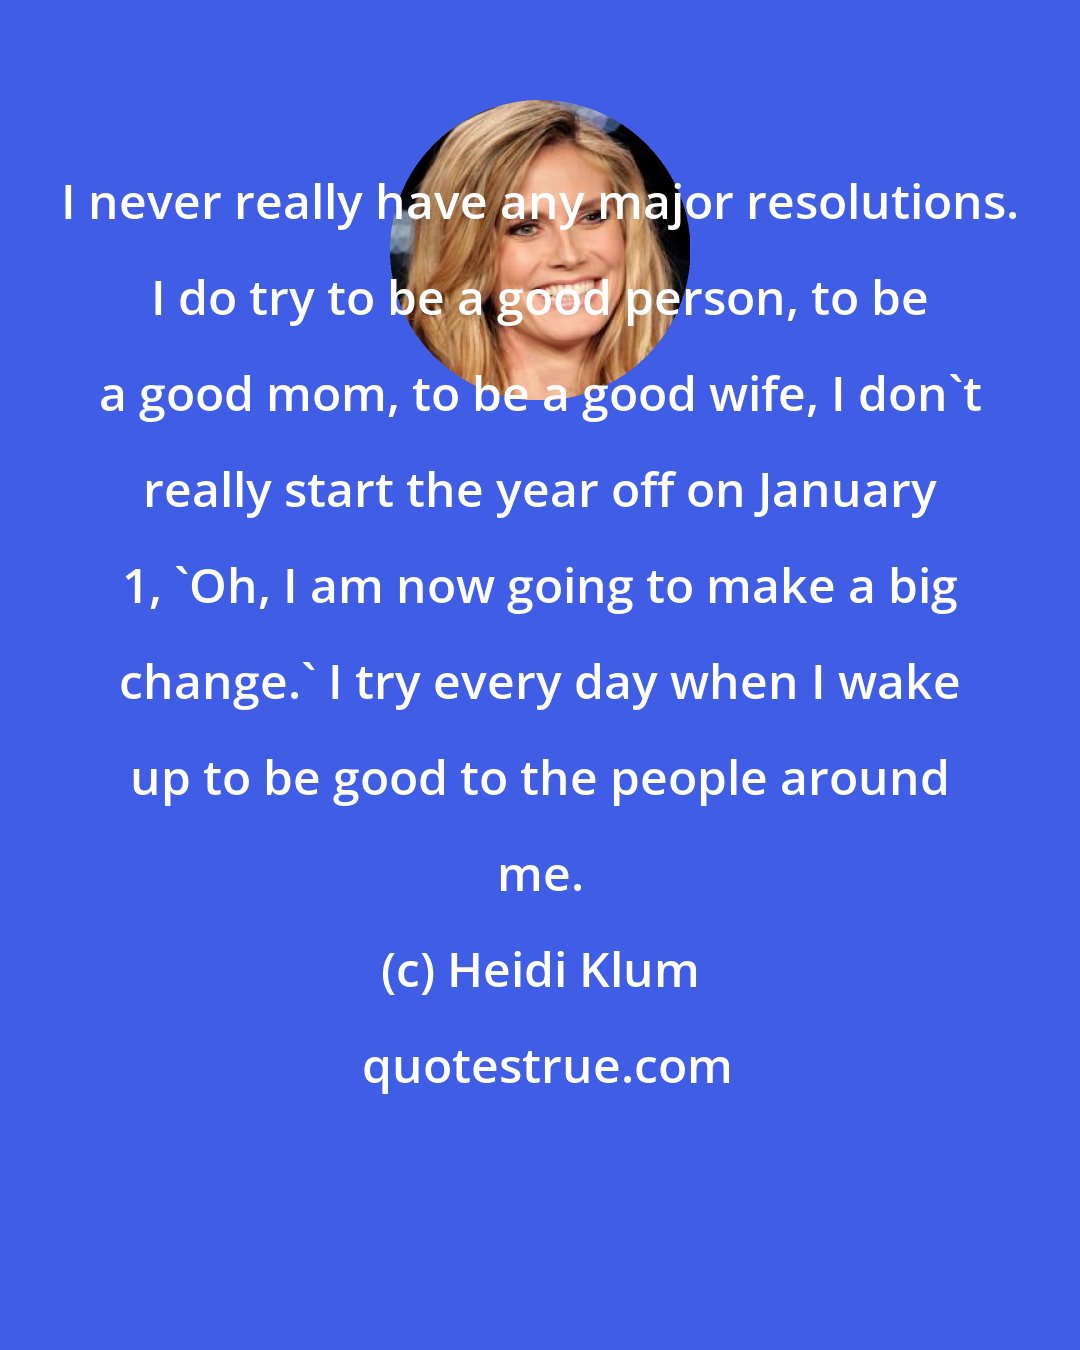 Heidi Klum: I never really have any major resolutions. I do try to be a good person, to be a good mom, to be a good wife, I don't really start the year off on January 1, 'Oh, I am now going to make a big change.' I try every day when I wake up to be good to the people around me.